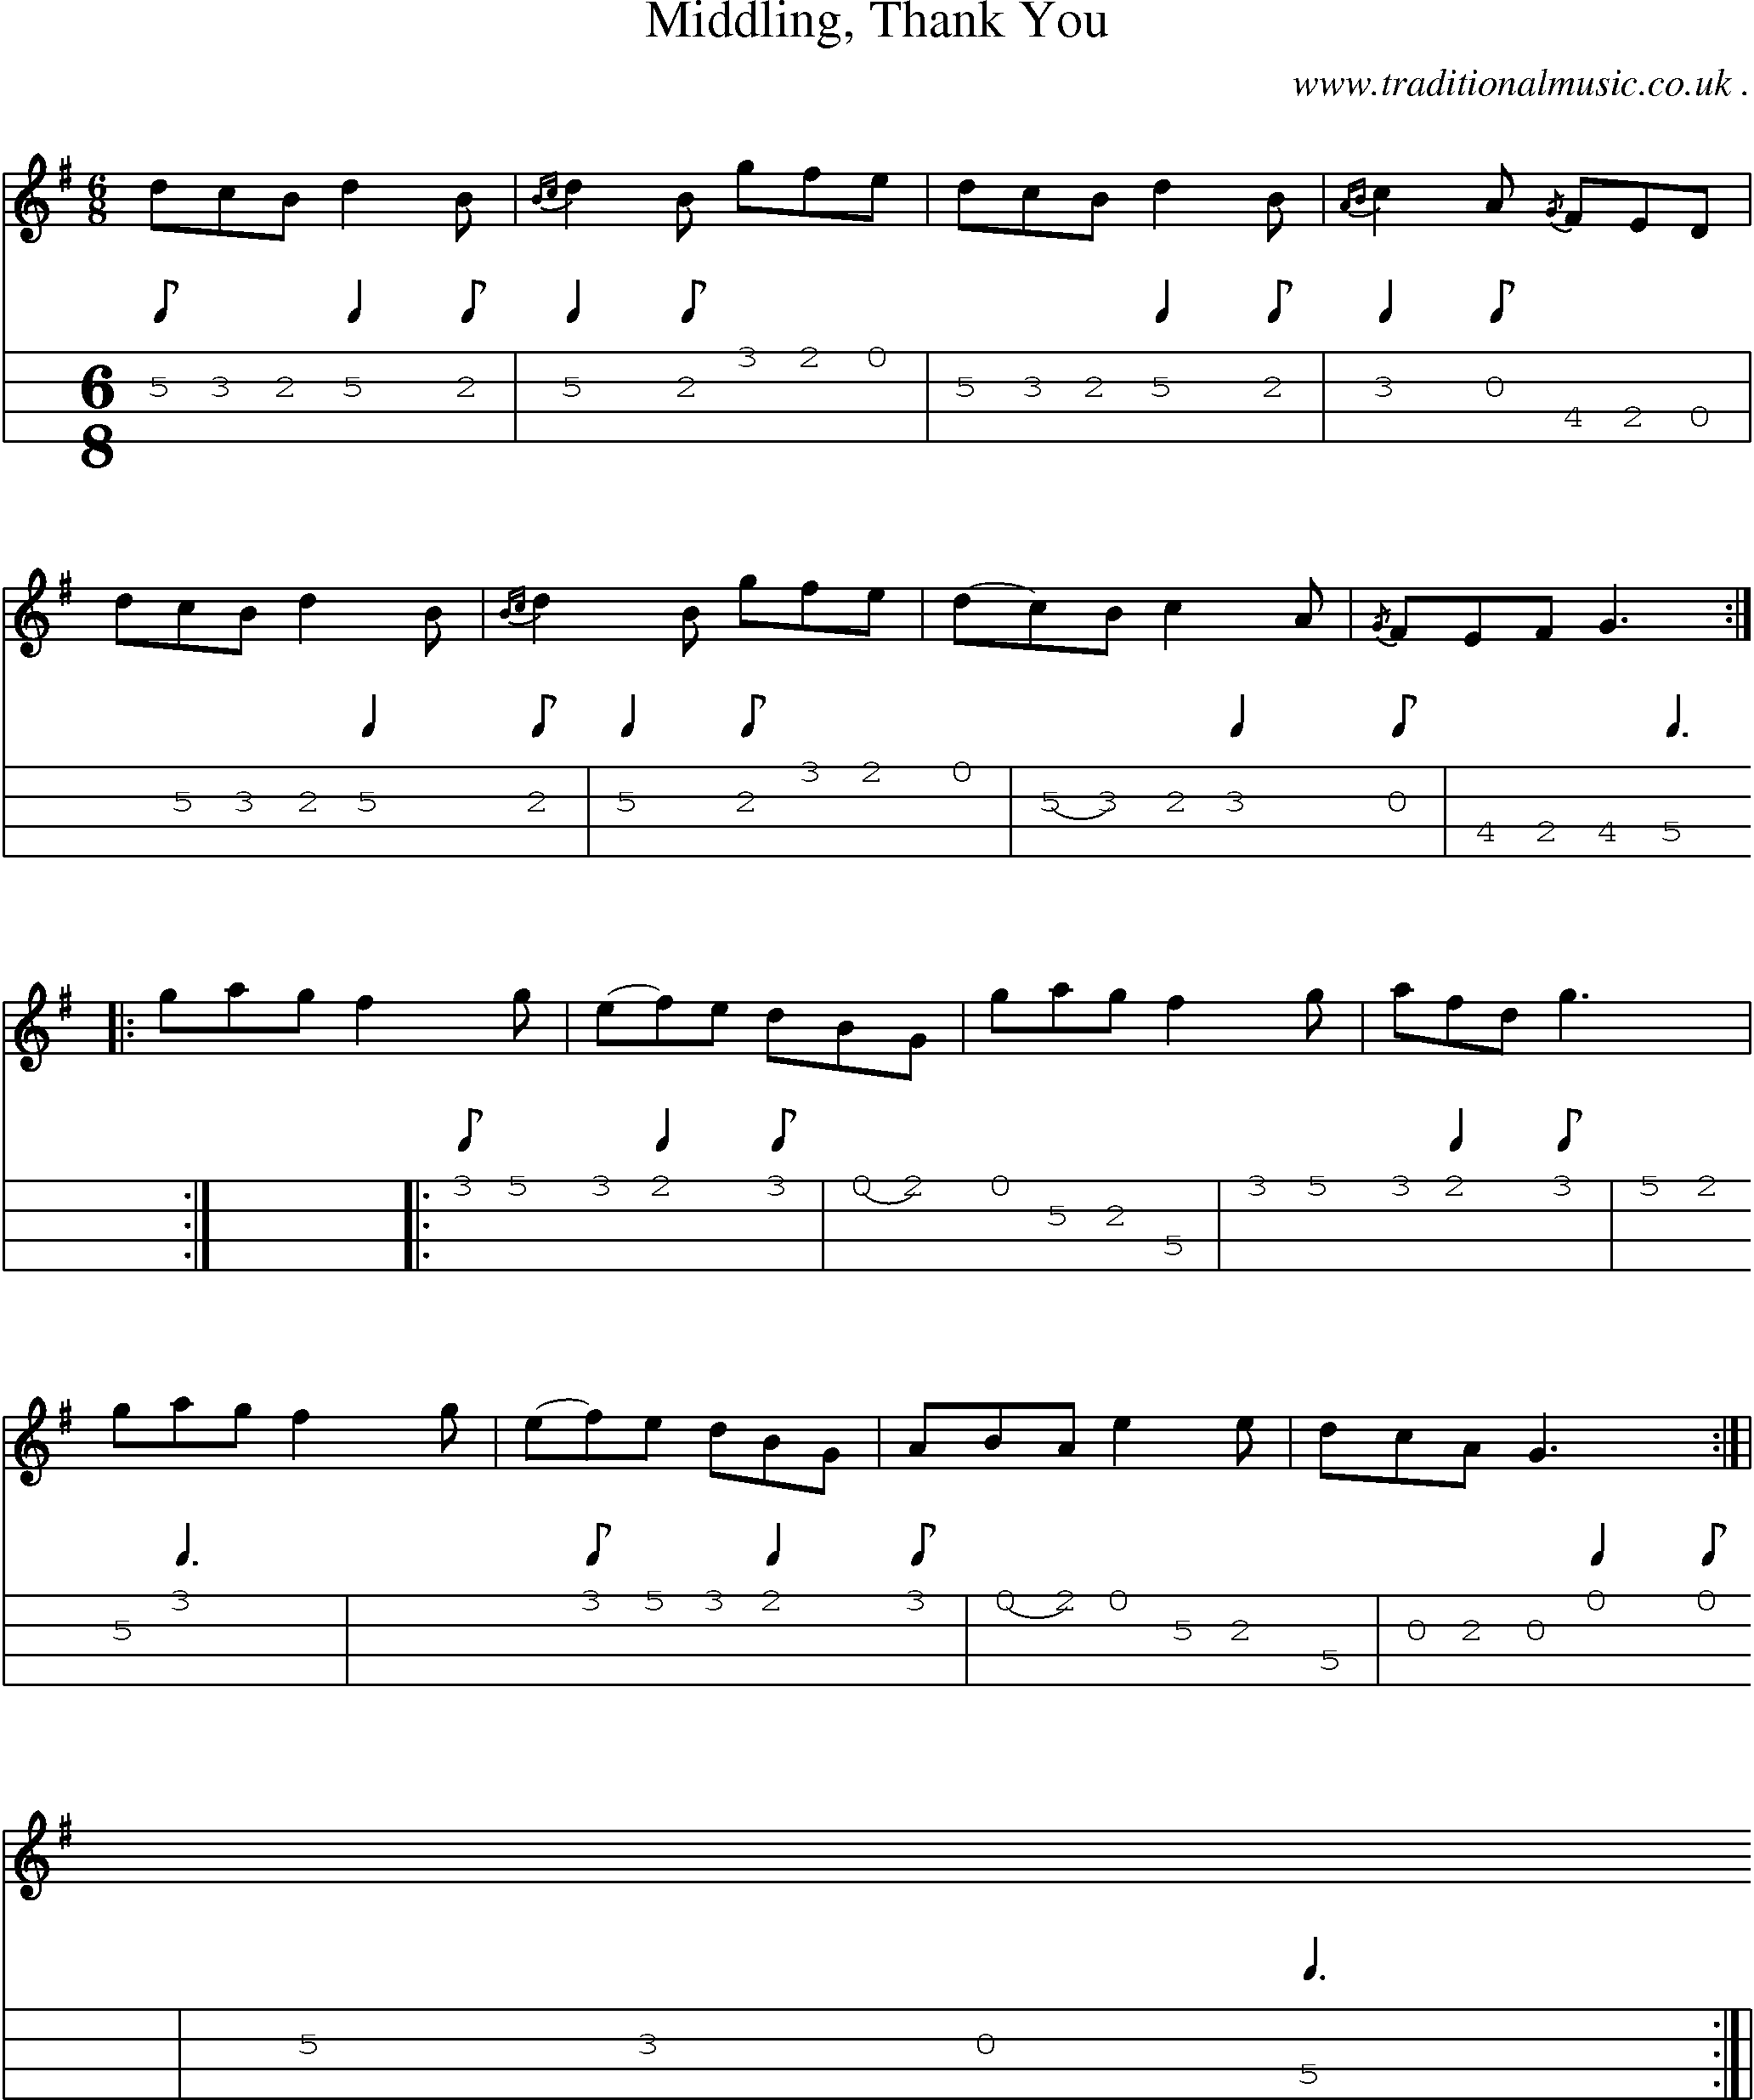 Sheet-music  score, Chords and Mandolin Tabs for Middling Thank You